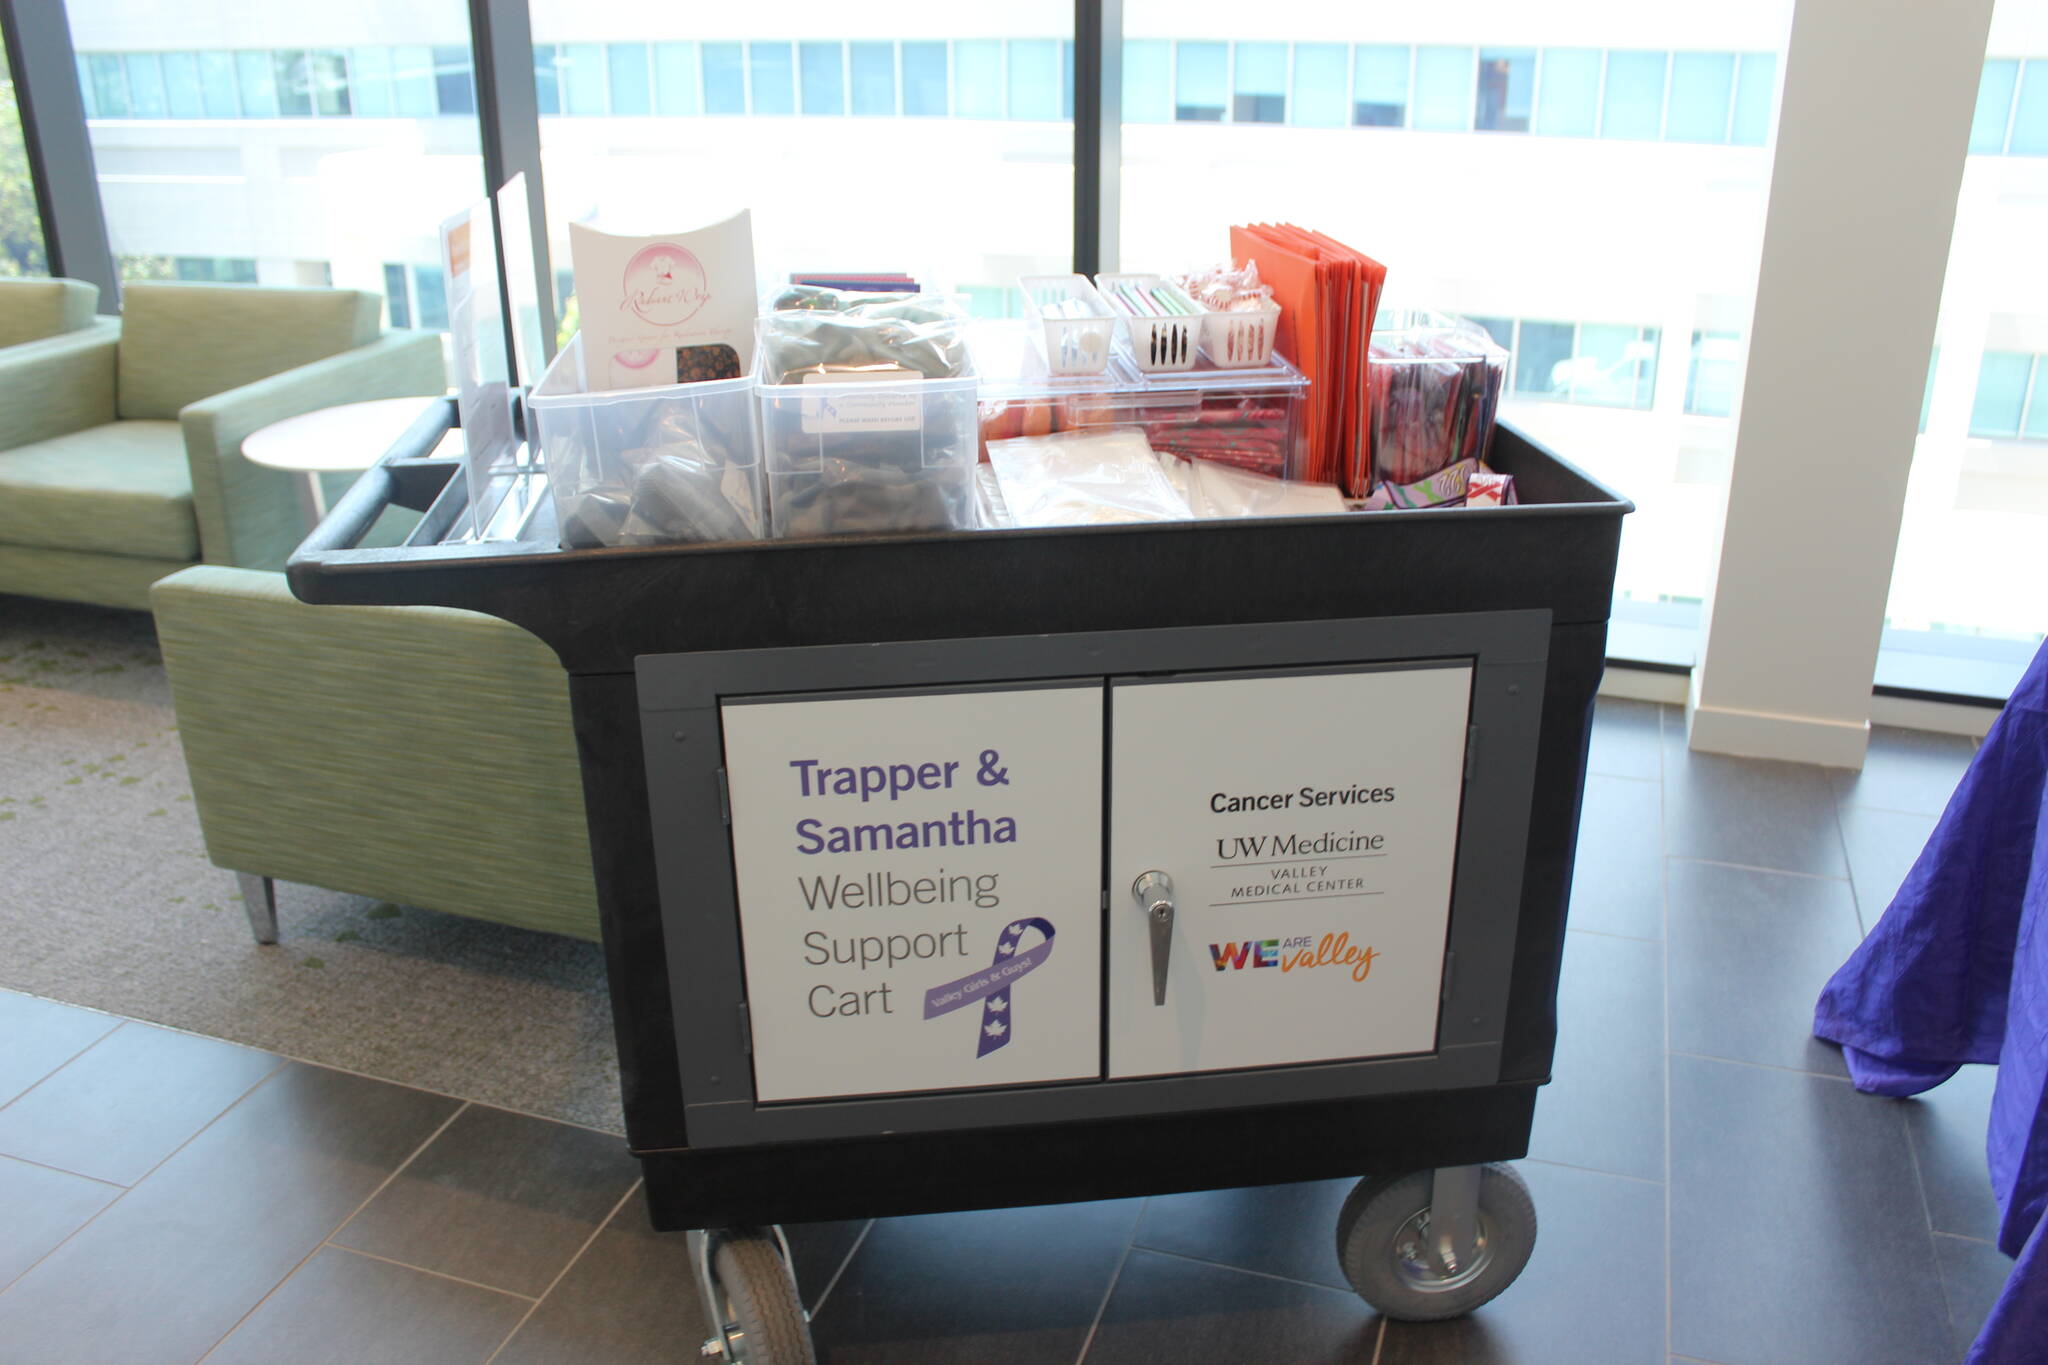 Trapper and Samantha O’Keeffe’s Wellbeing Support Cart, which provides free resources for patients during treatment, will become its own support room in the new Cancer Center at Valley Medical Center in Renton. Photo by Bailey Jo Josie/Sound Publishing.